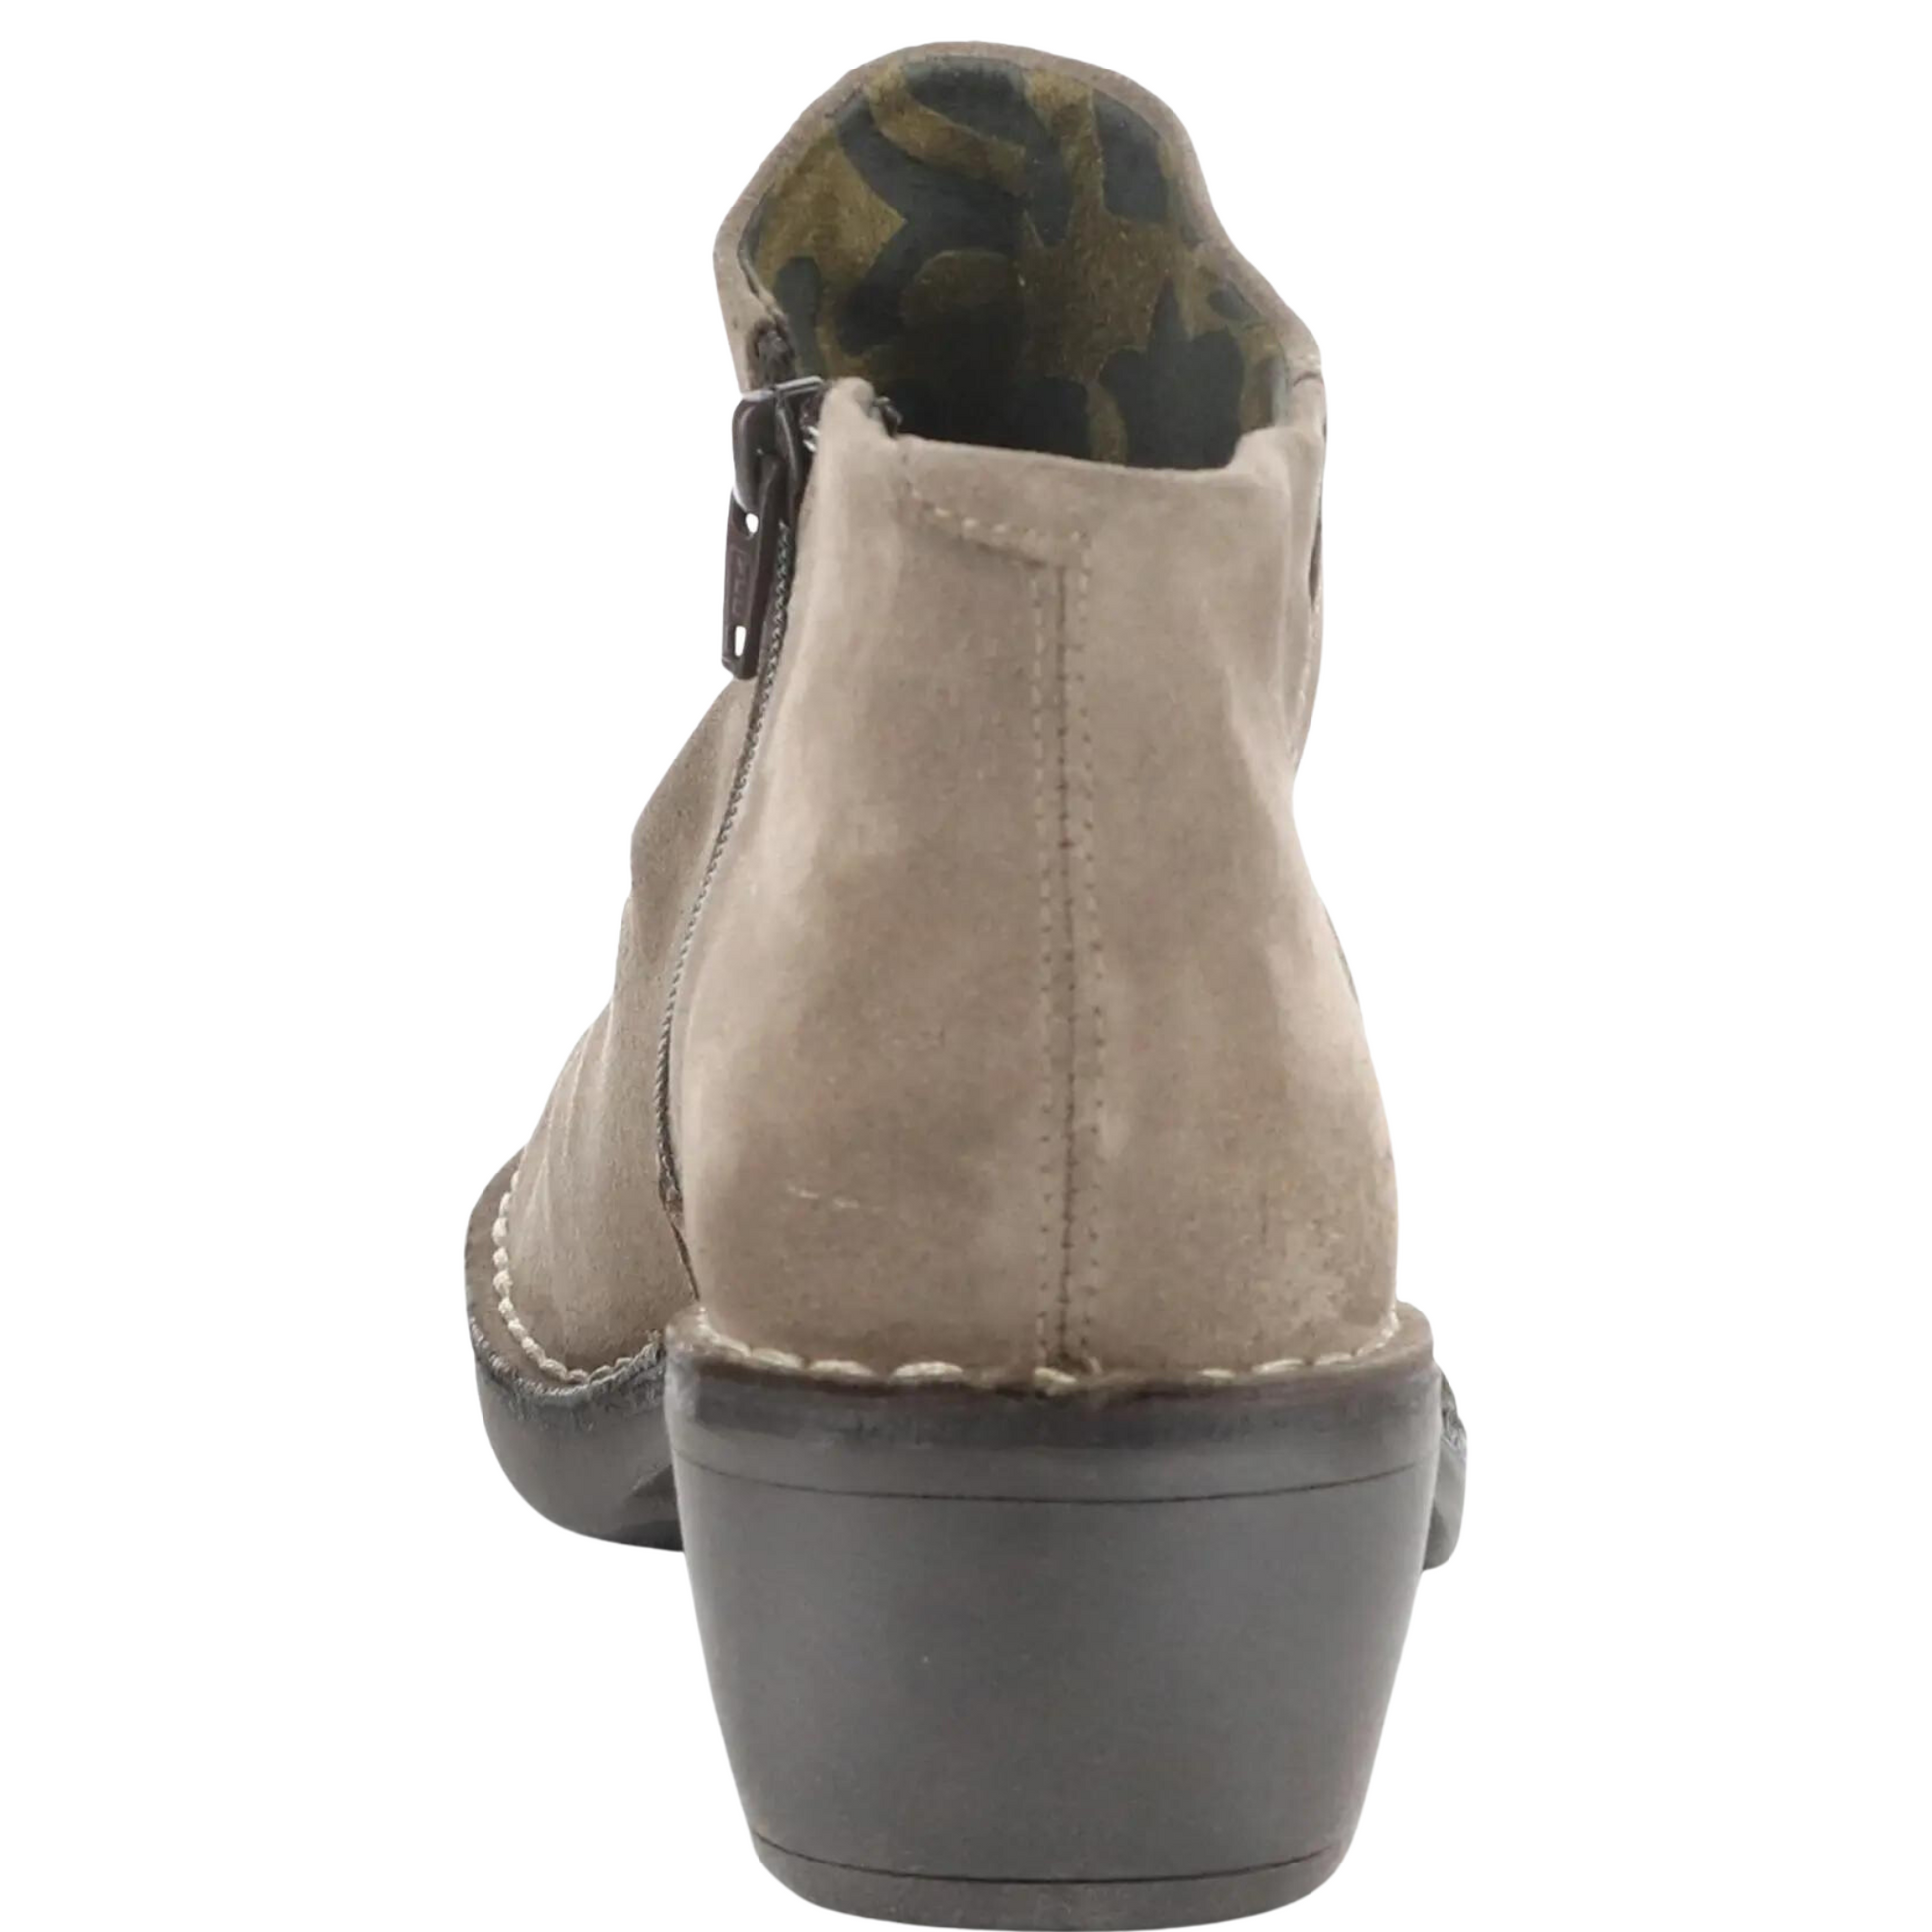 Rear profile of the Fly London Merk Boot in the colour Taupe.